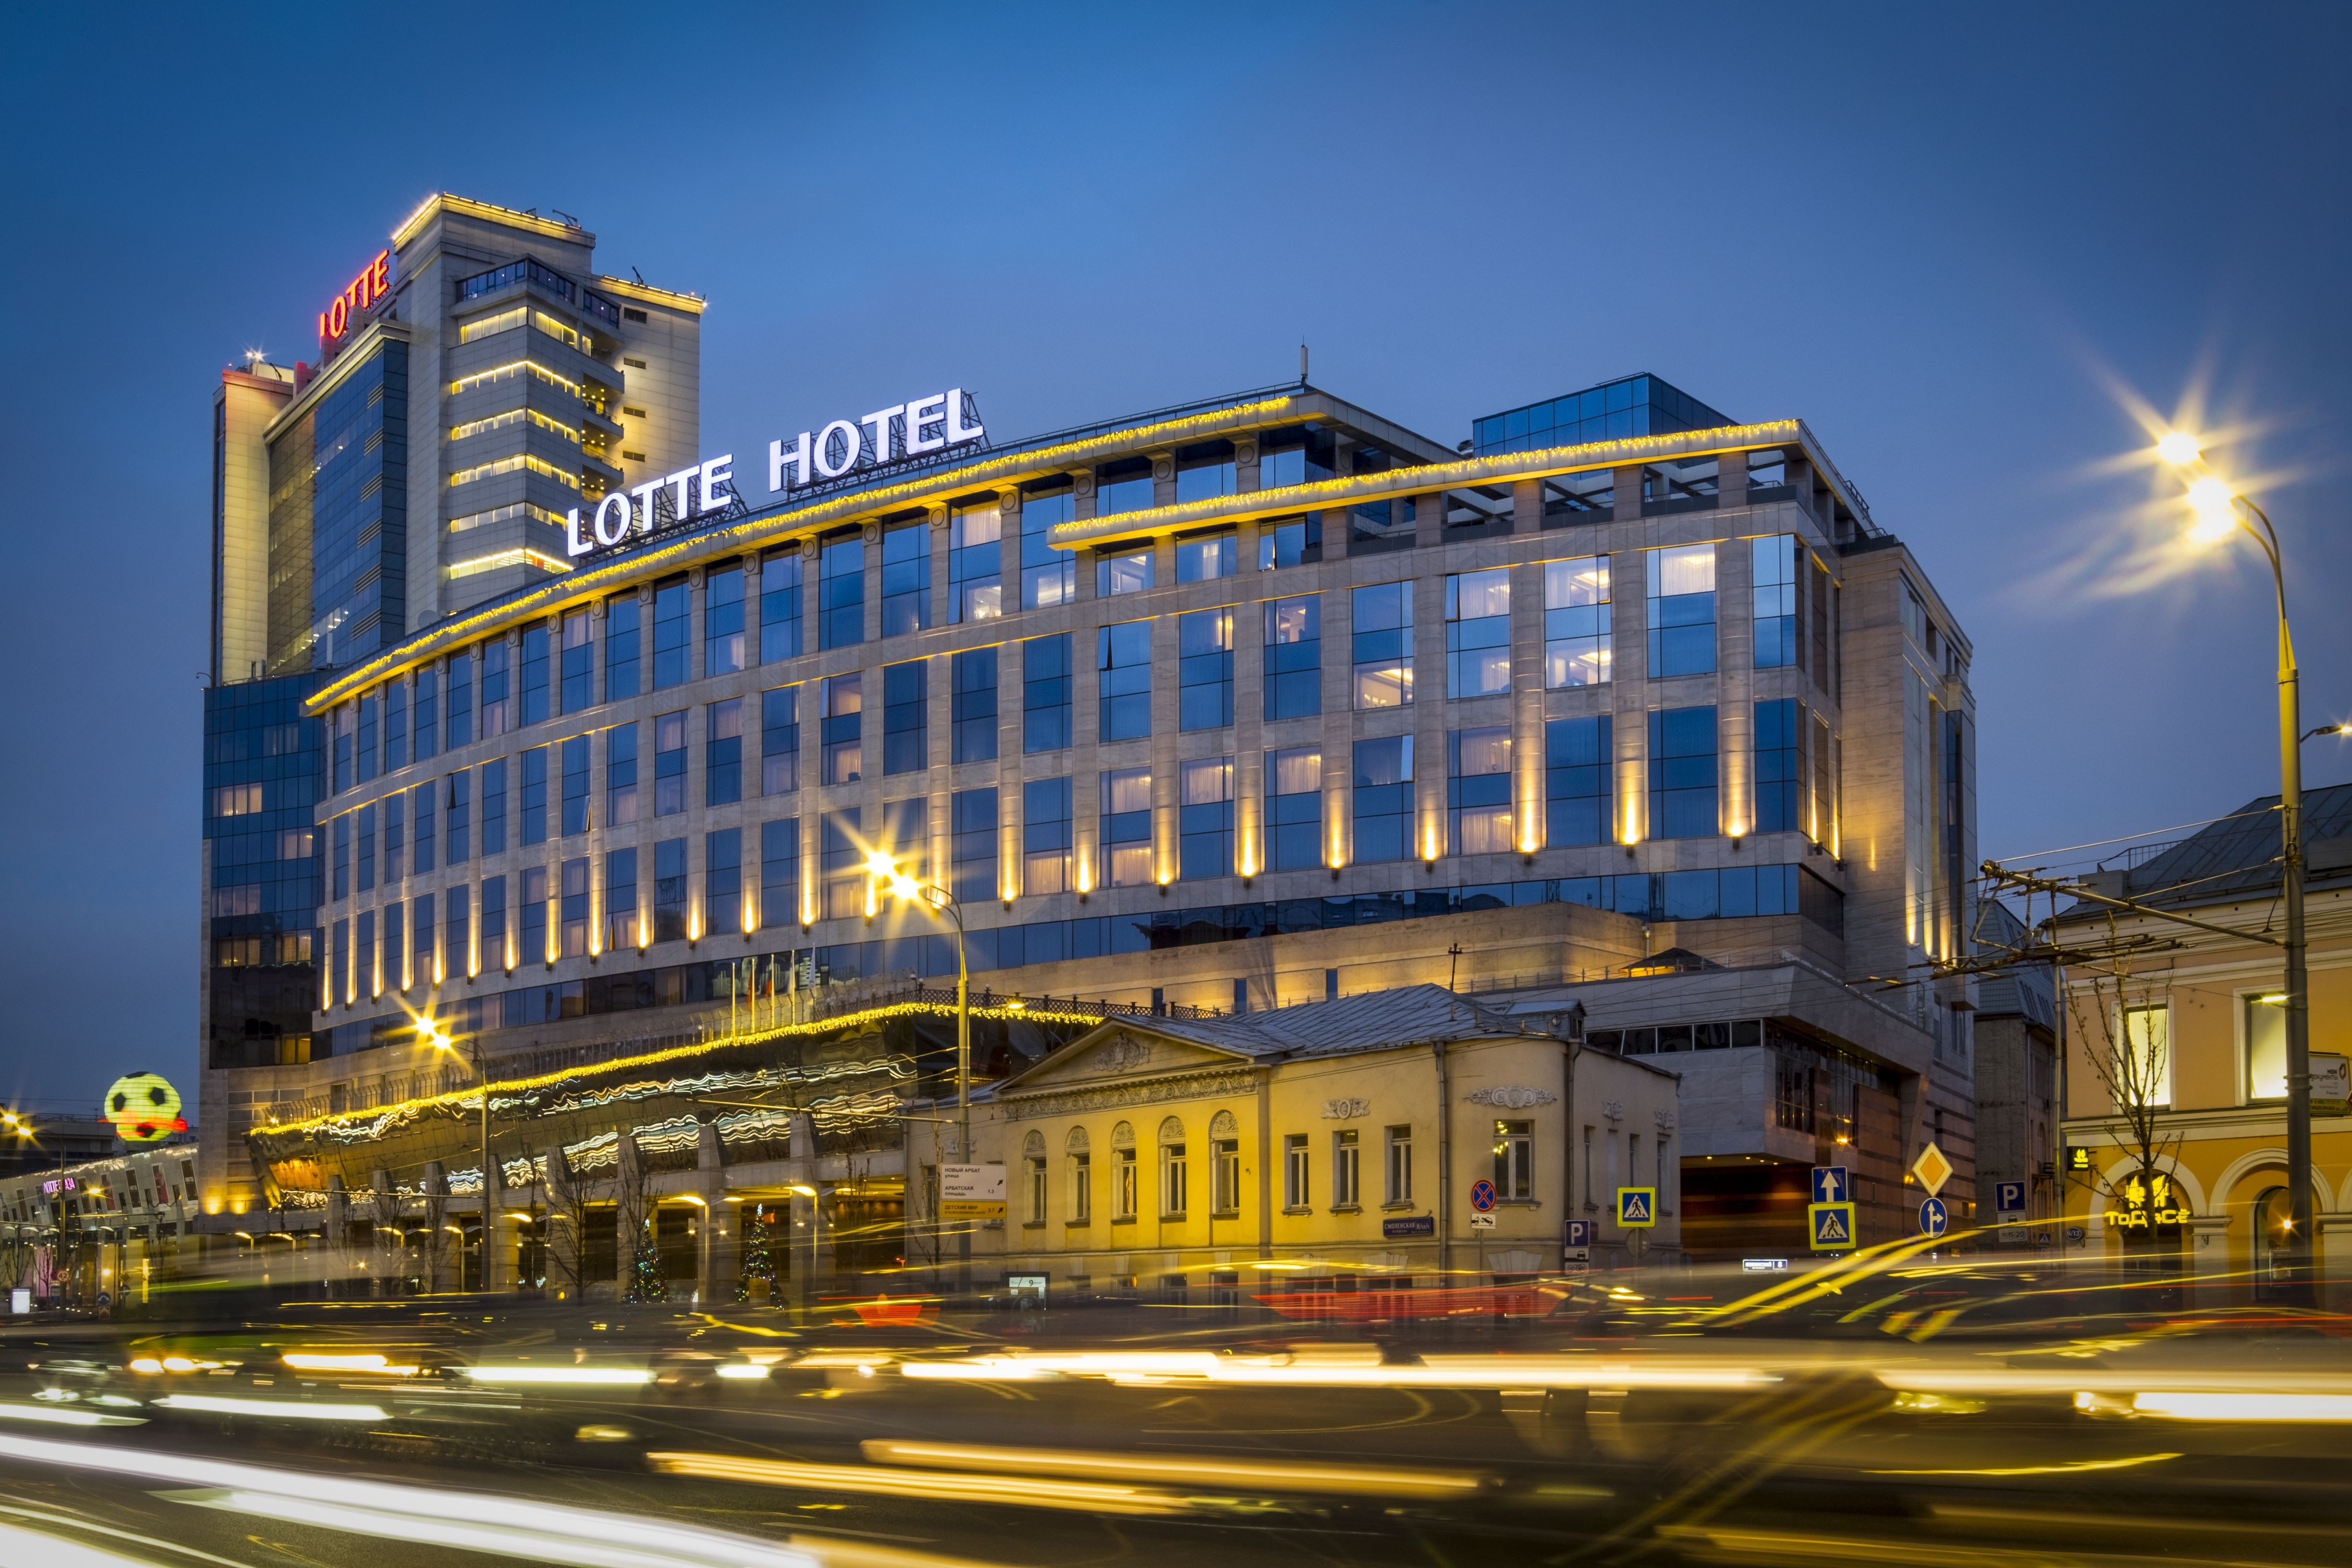 luxury Hotels near Ben Thanh Market For Foodie : Lotte hotel 